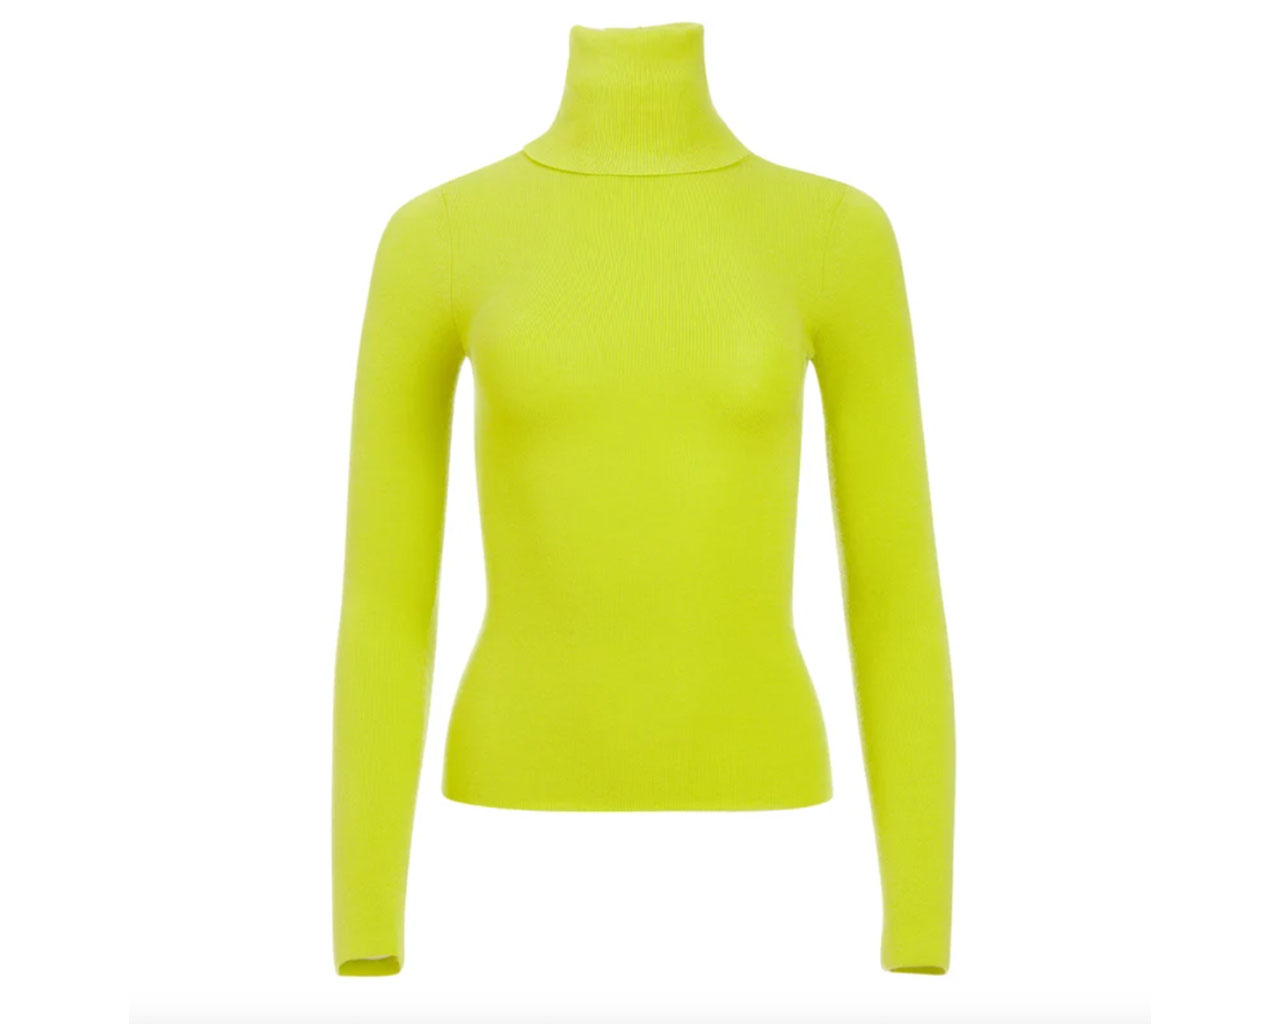 Shop-able neon sweaters